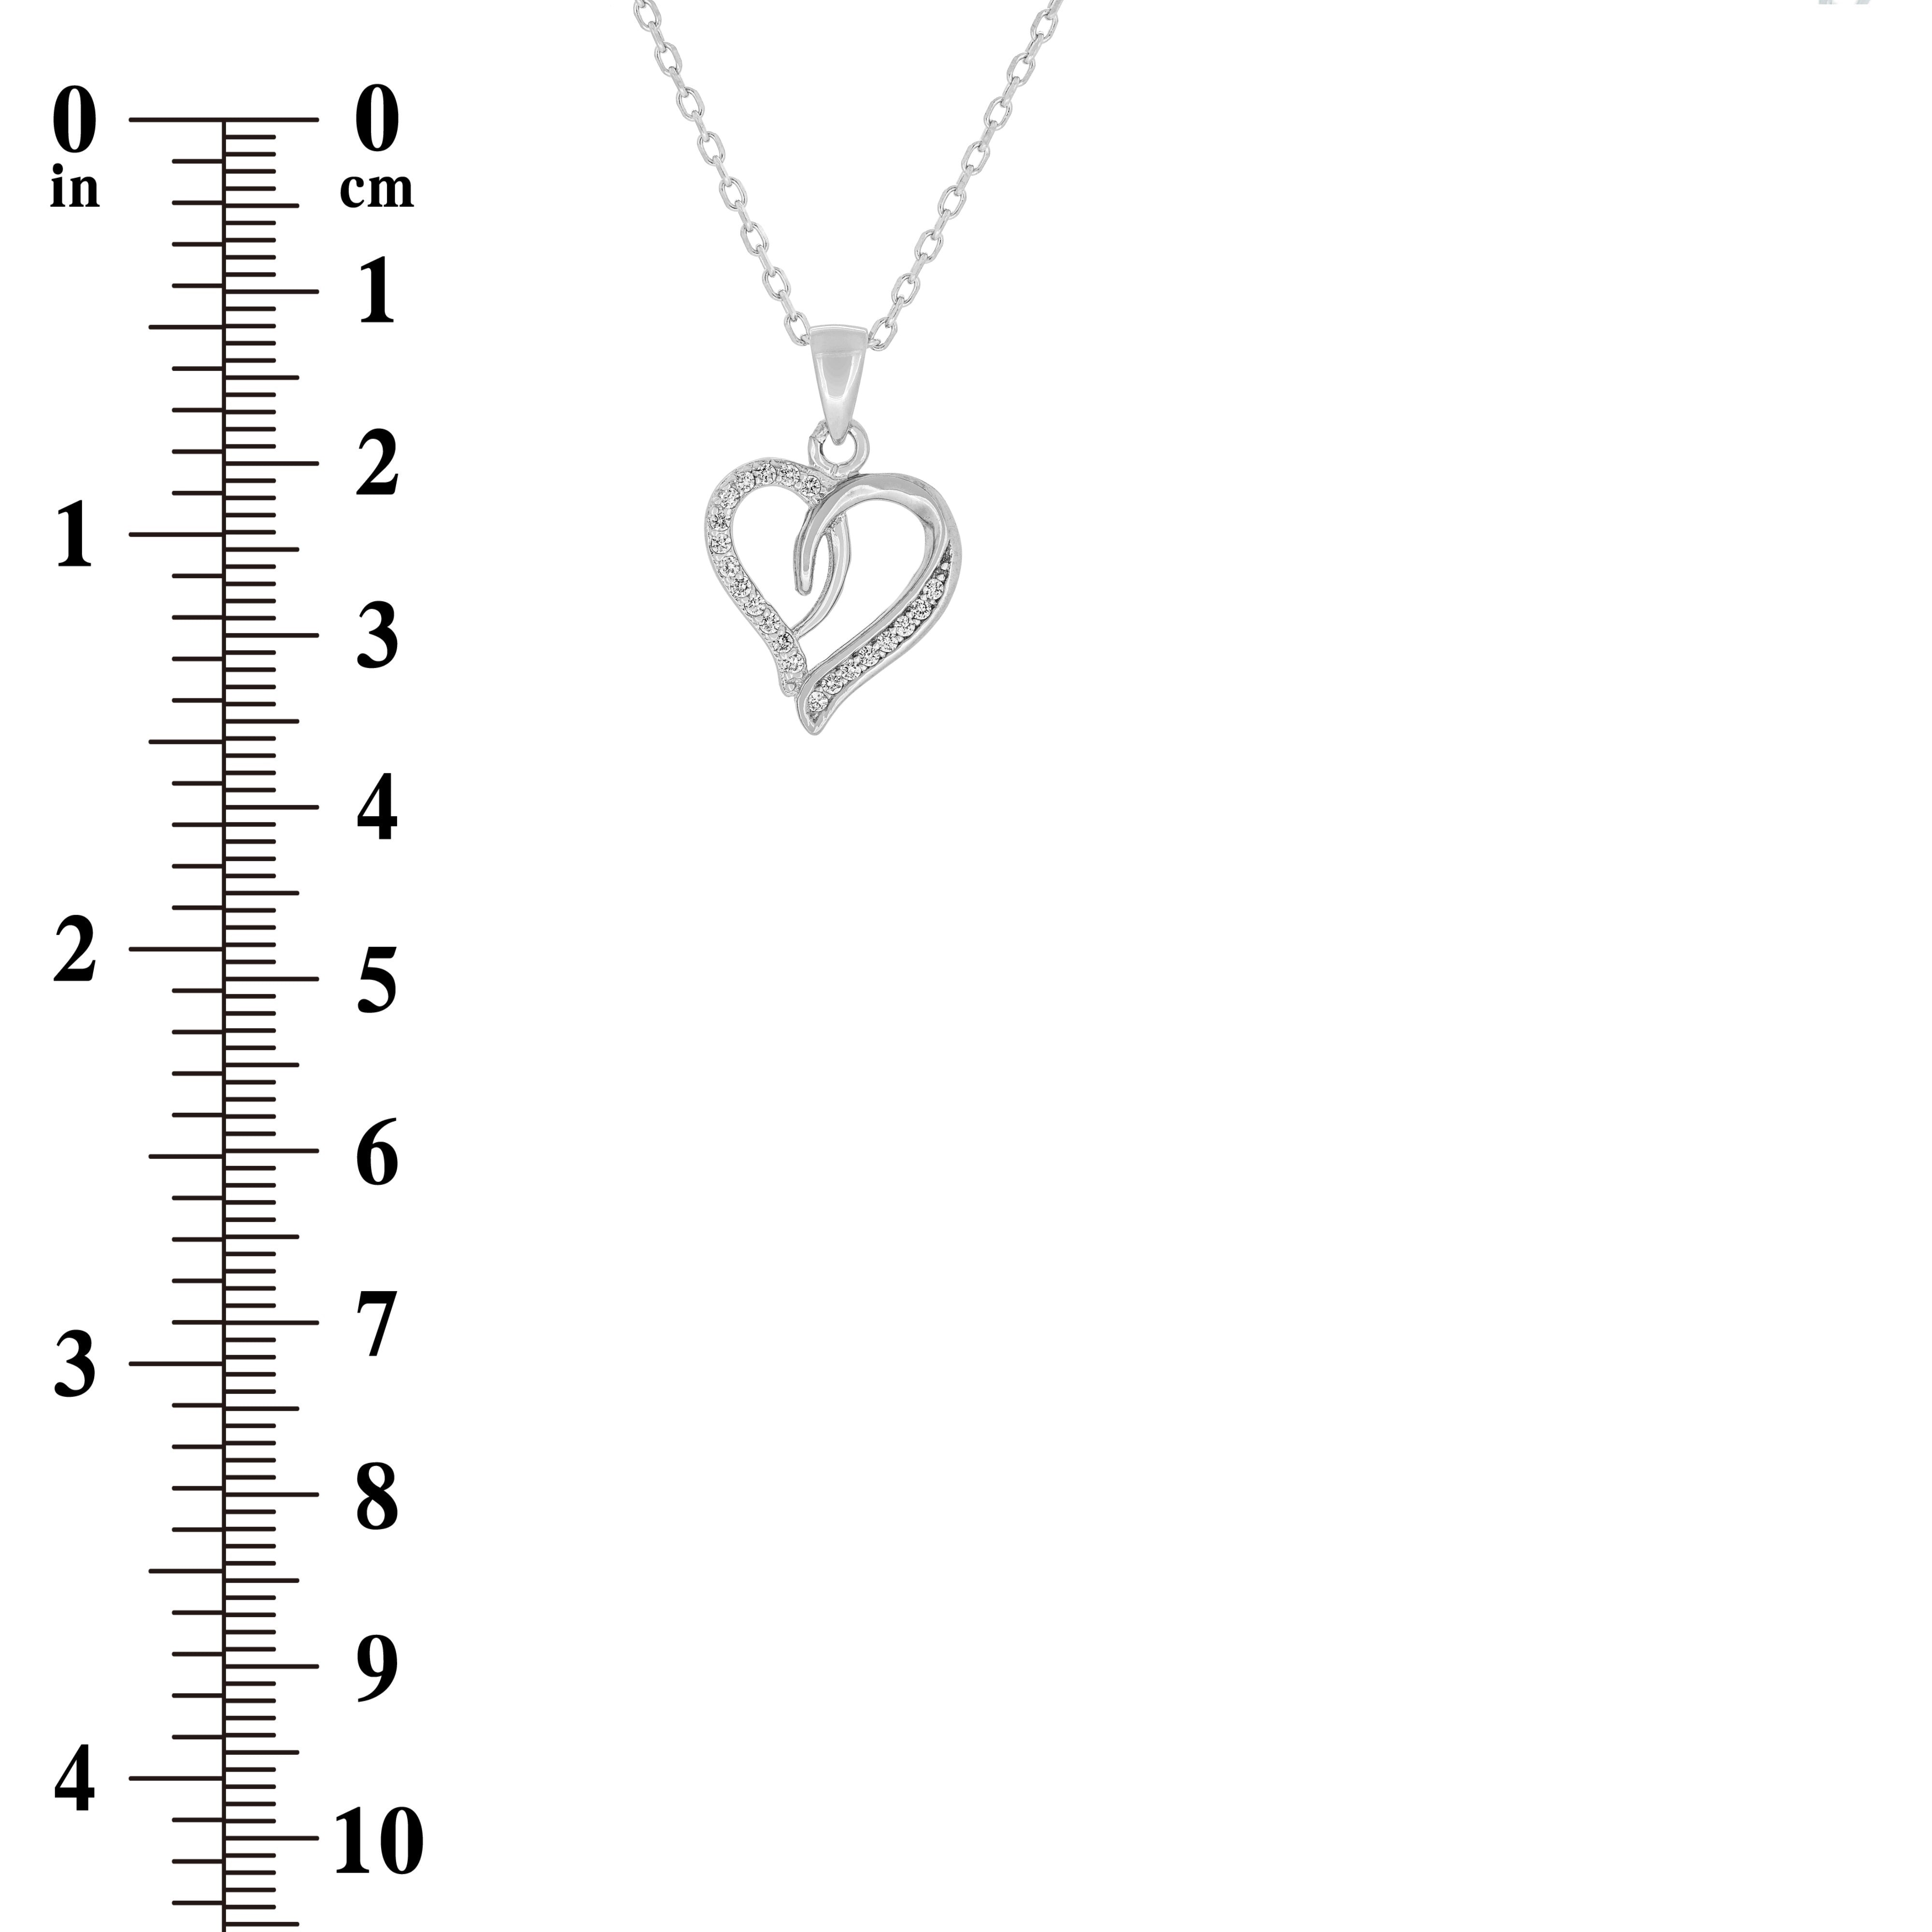 (100112A) White Cubic Zirconia Heart Pendant Necklace In Sterling Silver